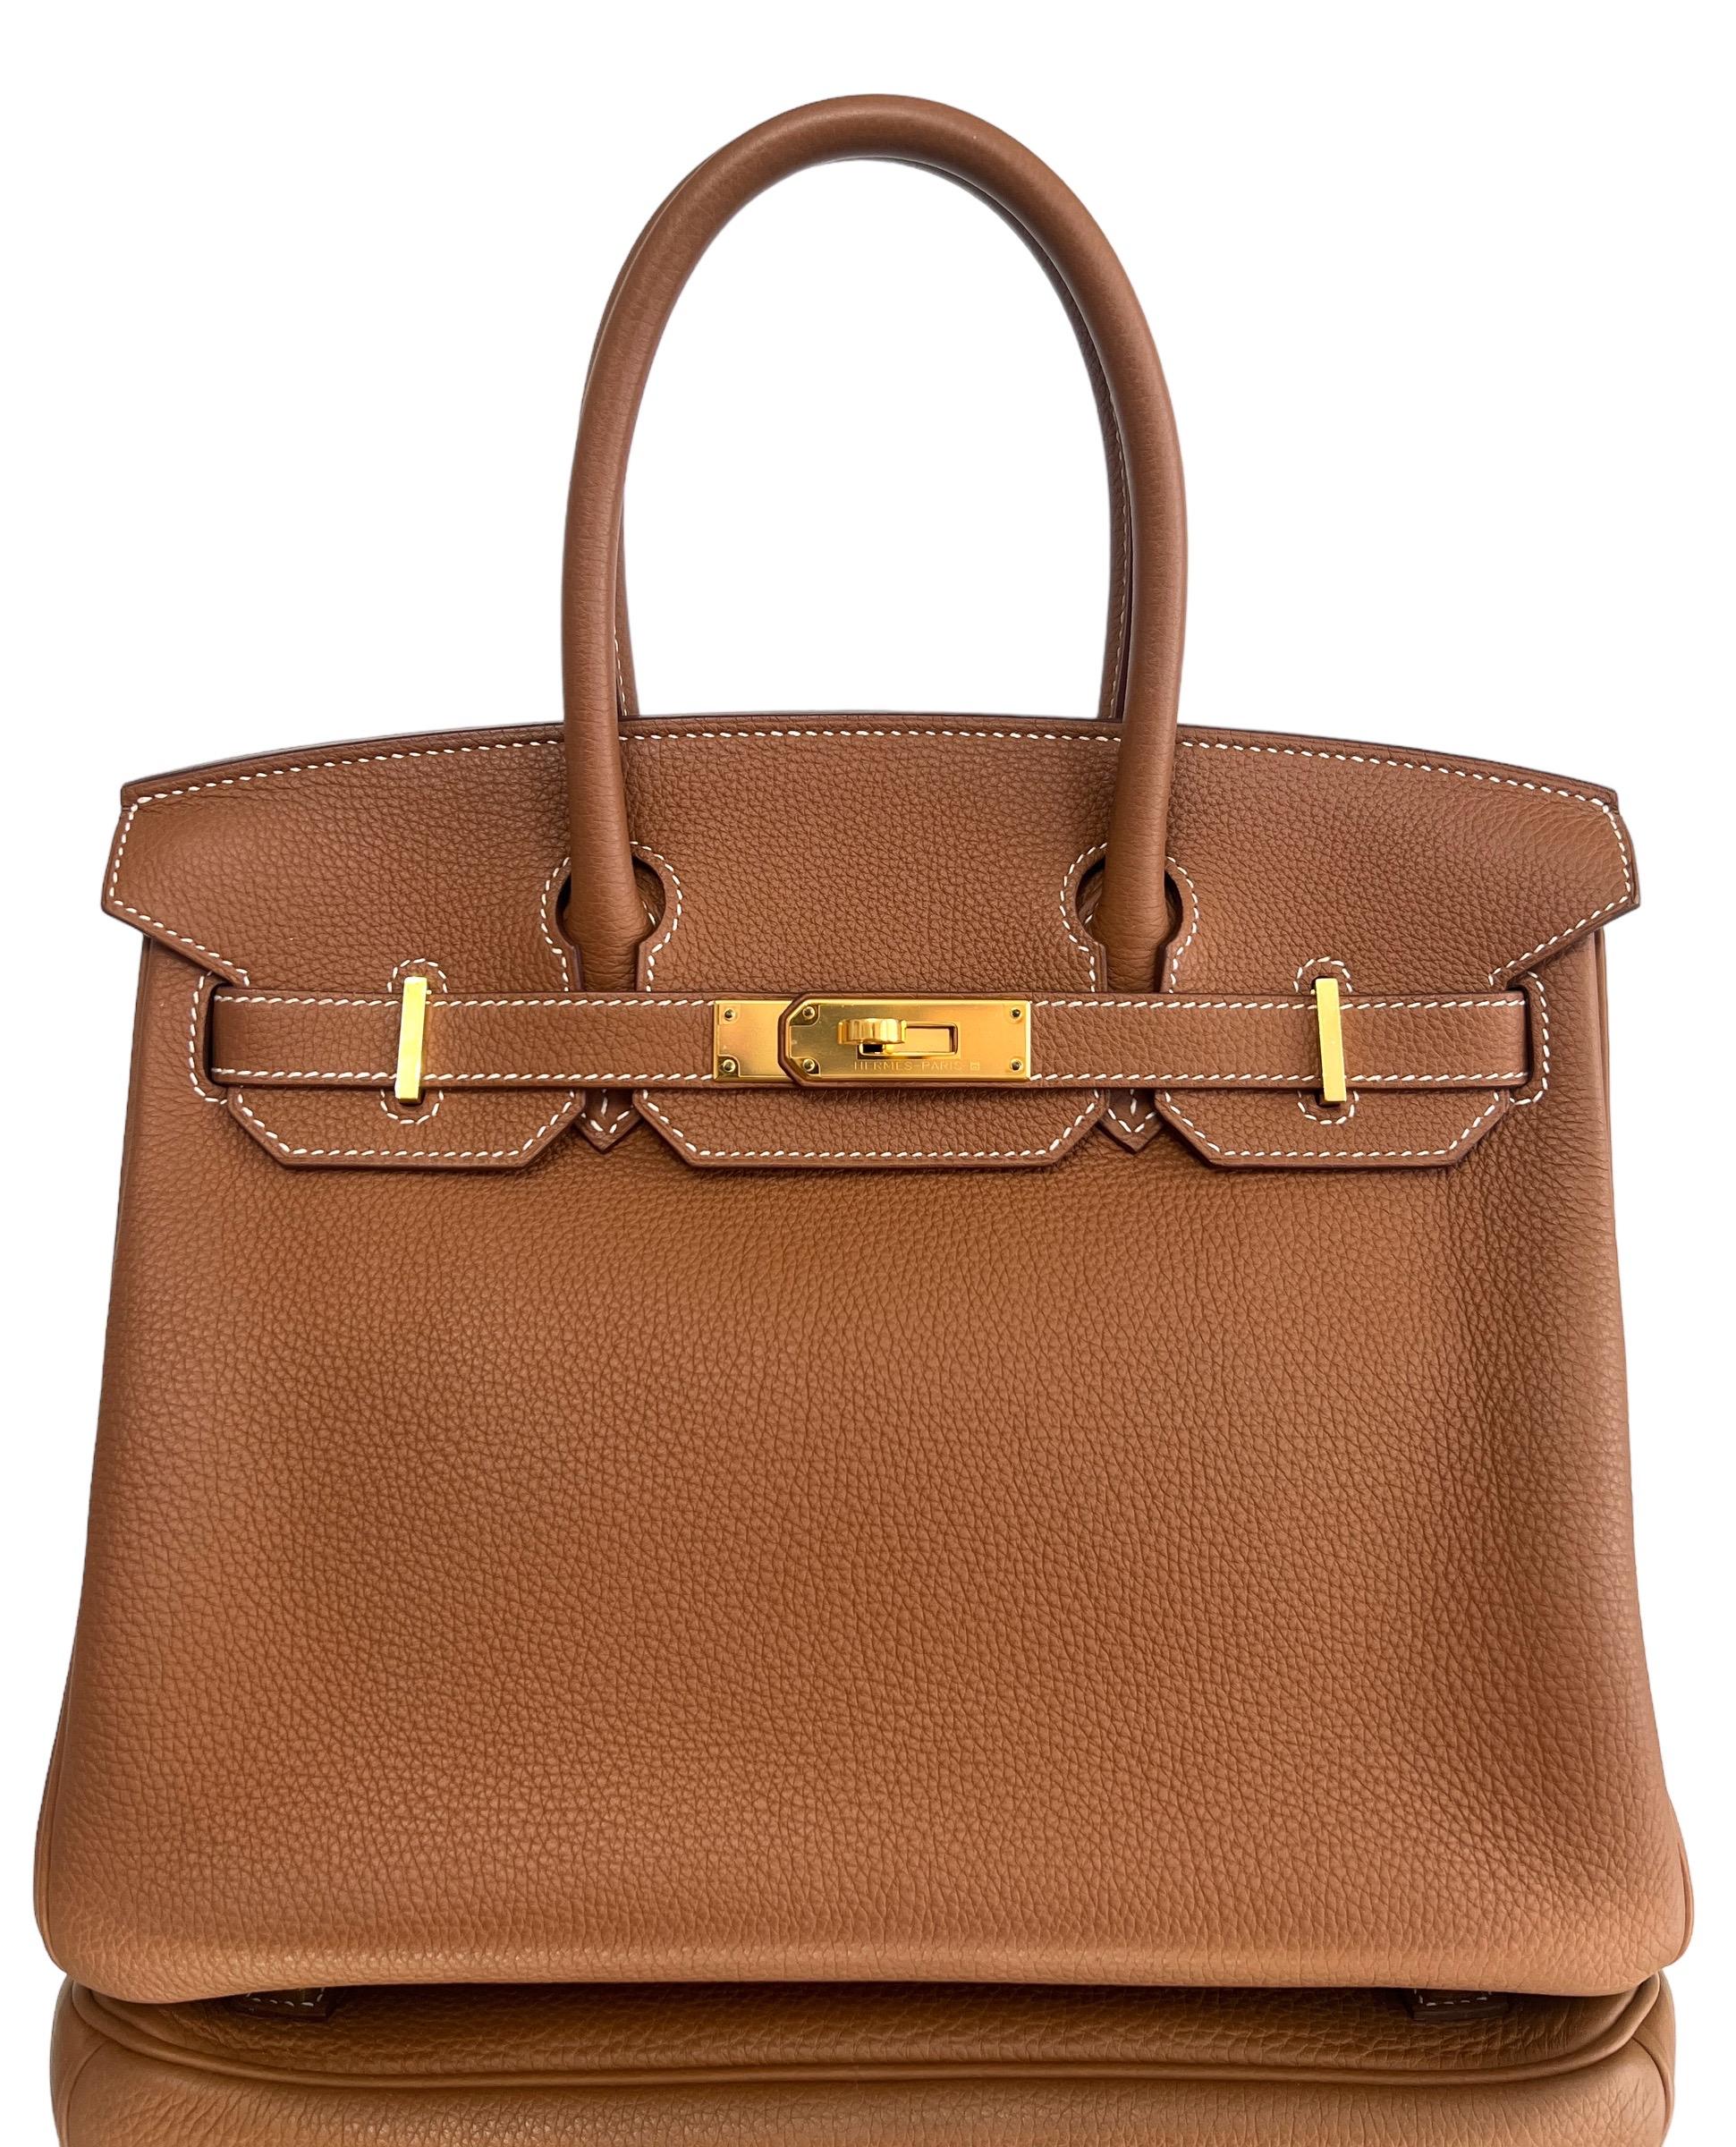 Absolutely Stunning and one the most coveted Hermes Colors and difficult to get! Hermès Birkin 30 Gold Tan Camel Togo Leather Gold Hardware. Pristine Condition with Plastic on Hardware. 2017 A Stamp.

 Shop with Confidence from Lux Addicts.